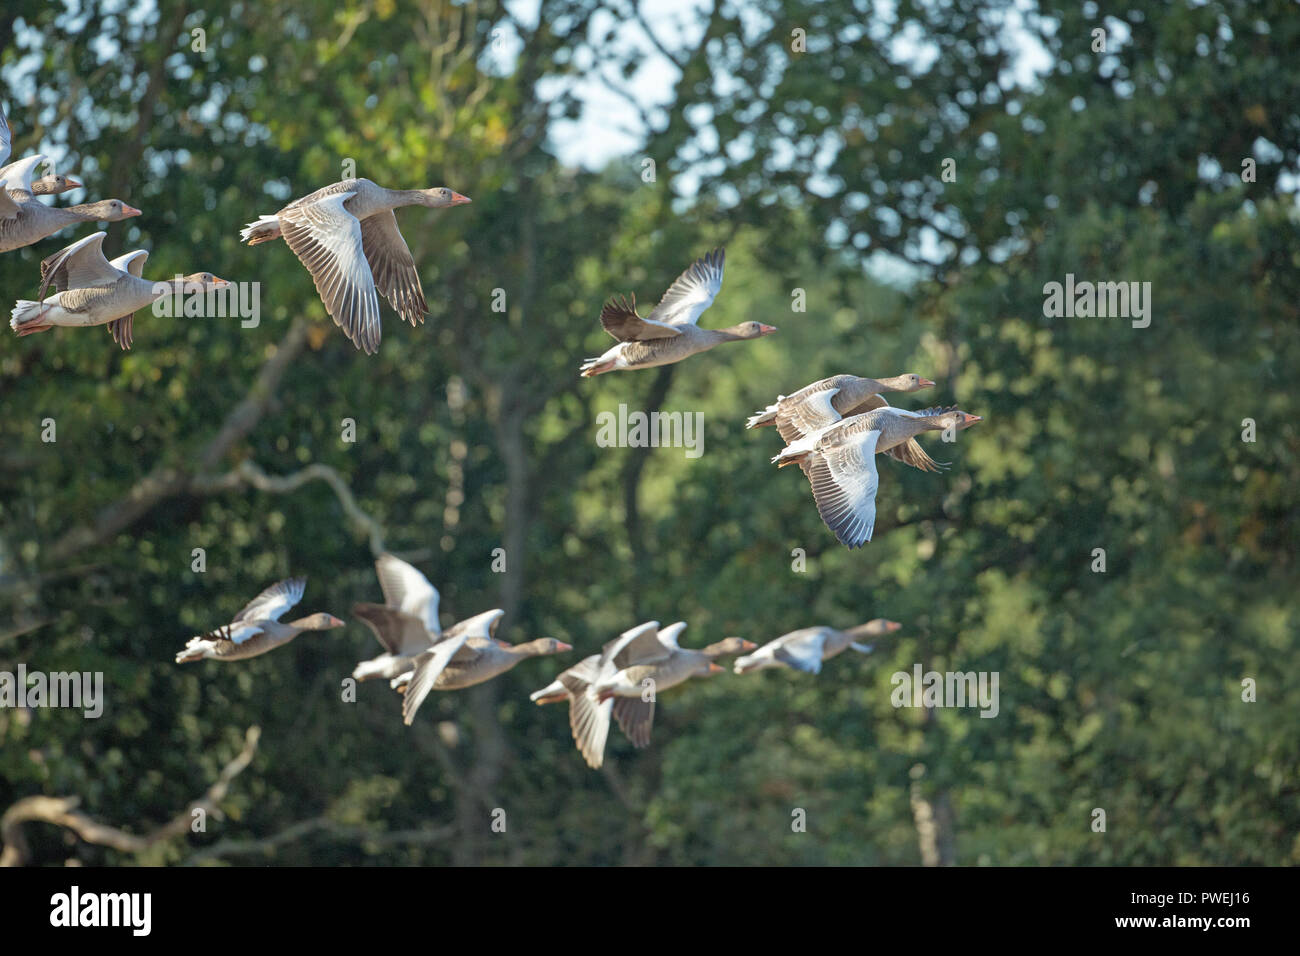 Greylag Geese (Anser anser). Horizontal flight, against a background of woodland, having left a field of recently harvested cereals. Calthorpe, Hickling, Broadland, Norfolk. The UK. Stock Photo